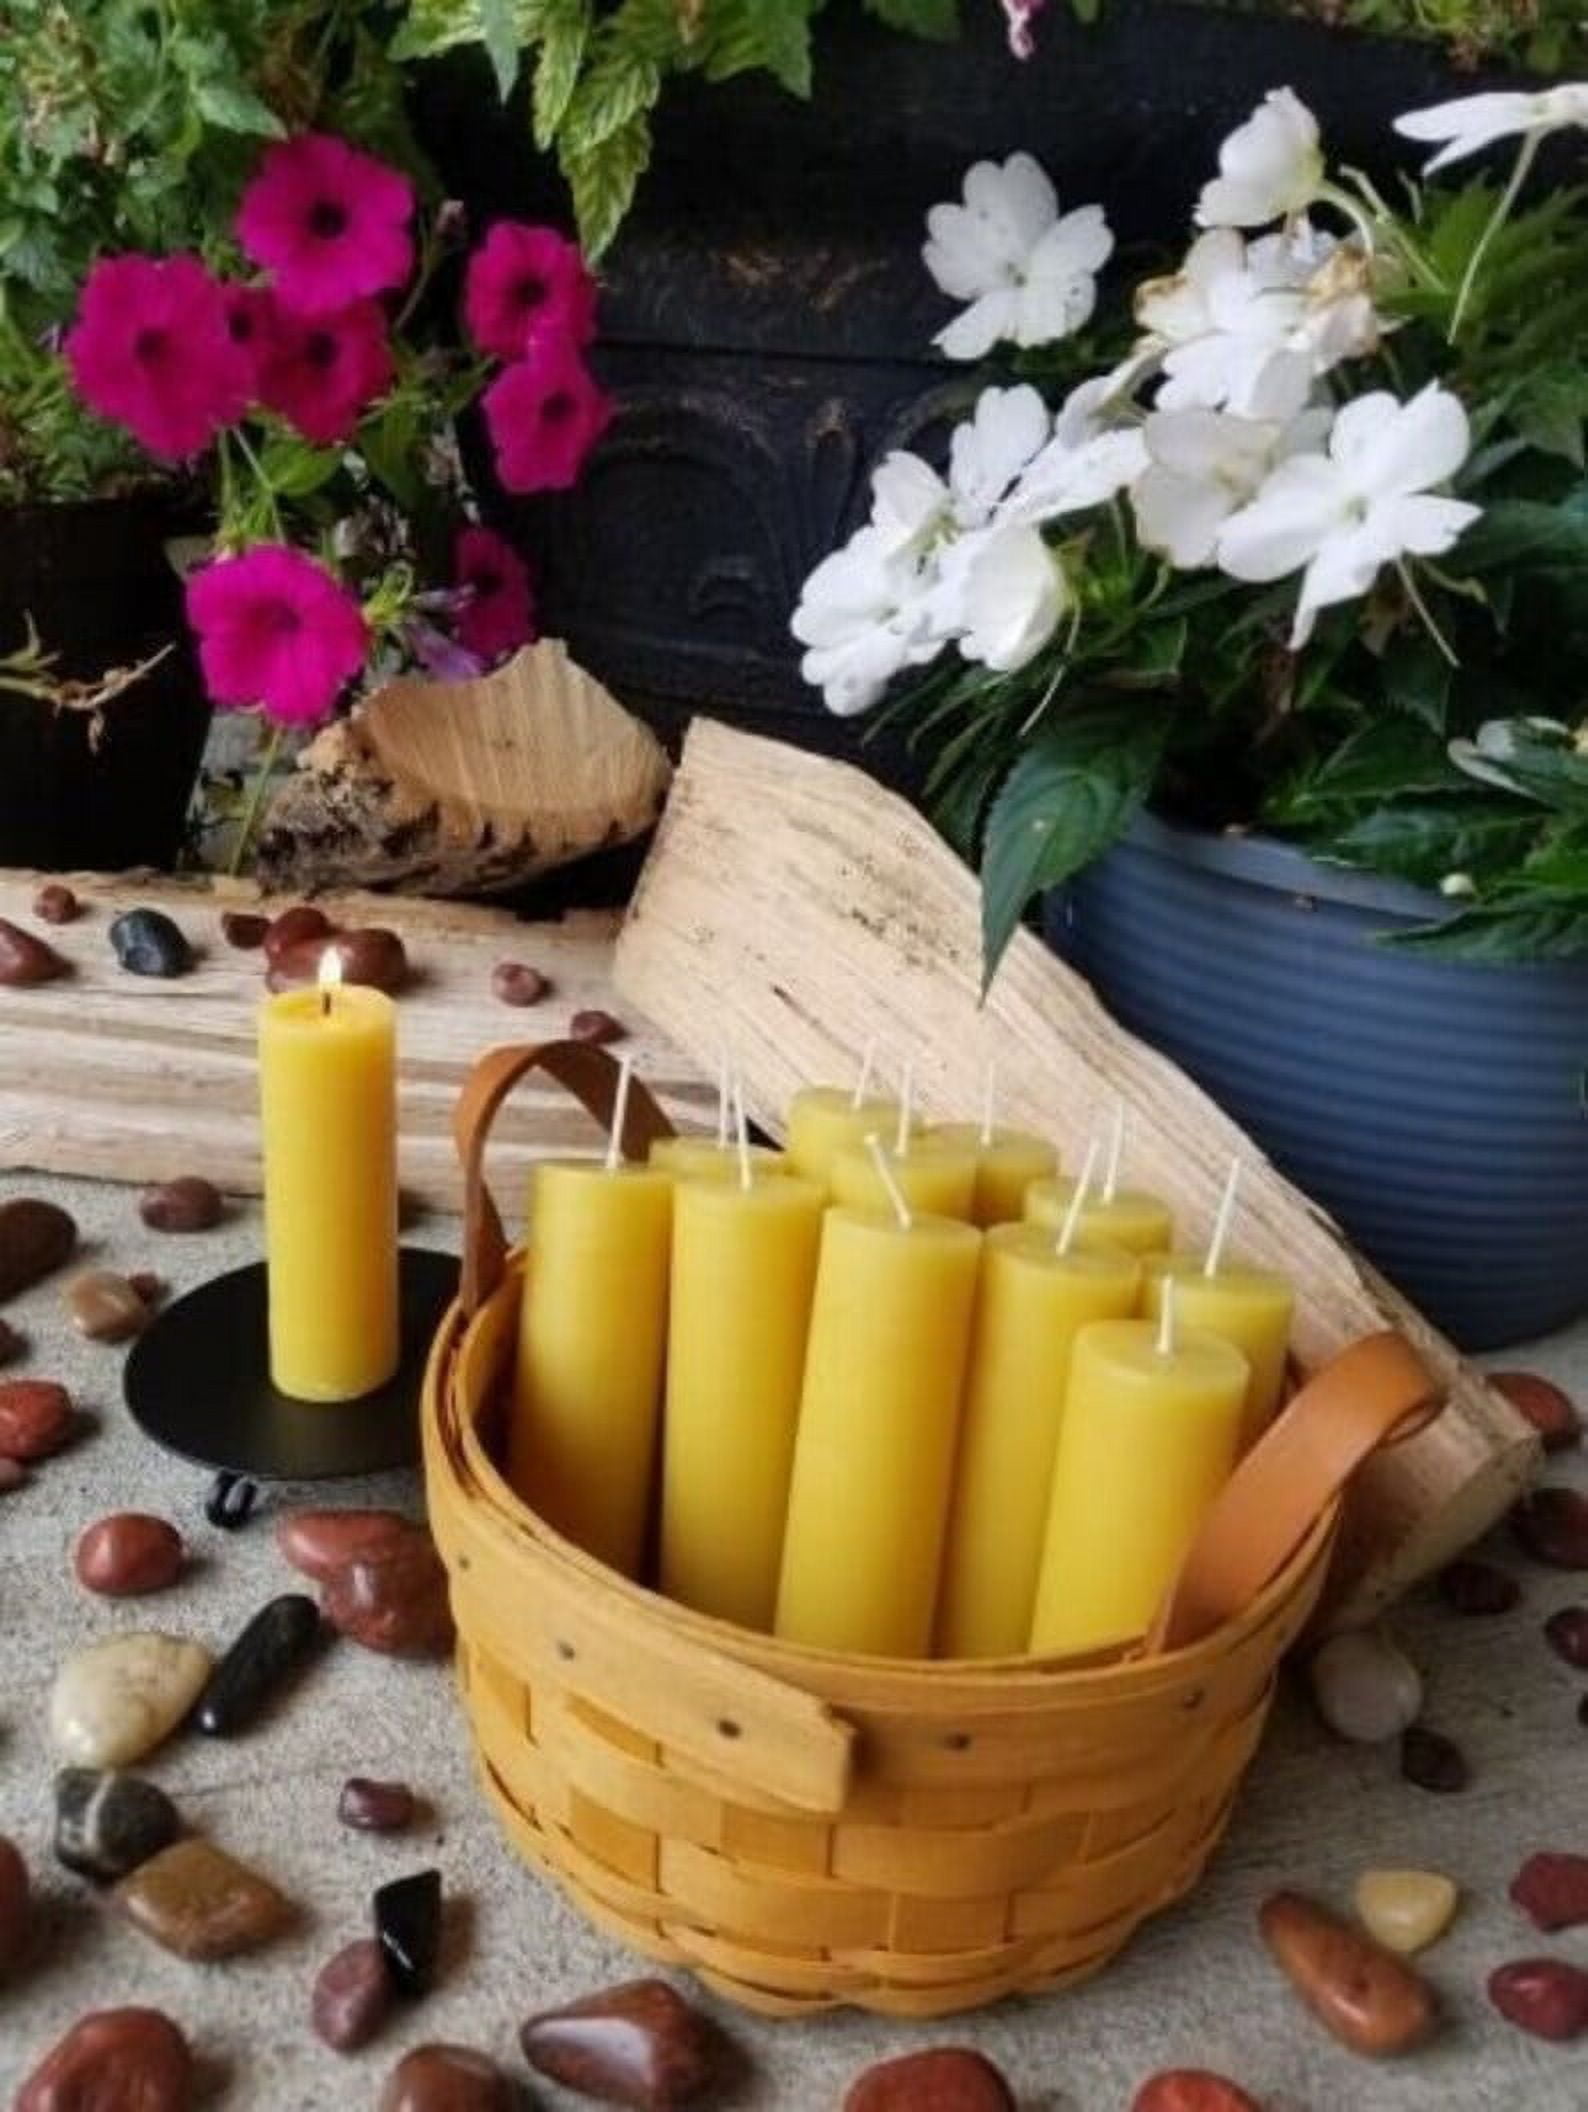 Bulk Beeswax Pillar Candles 100 % Pure Beeswax Organic Long Burning  Colonnade 4-inch x 1.25-inch 12 Pack Hypo-Allergenic 